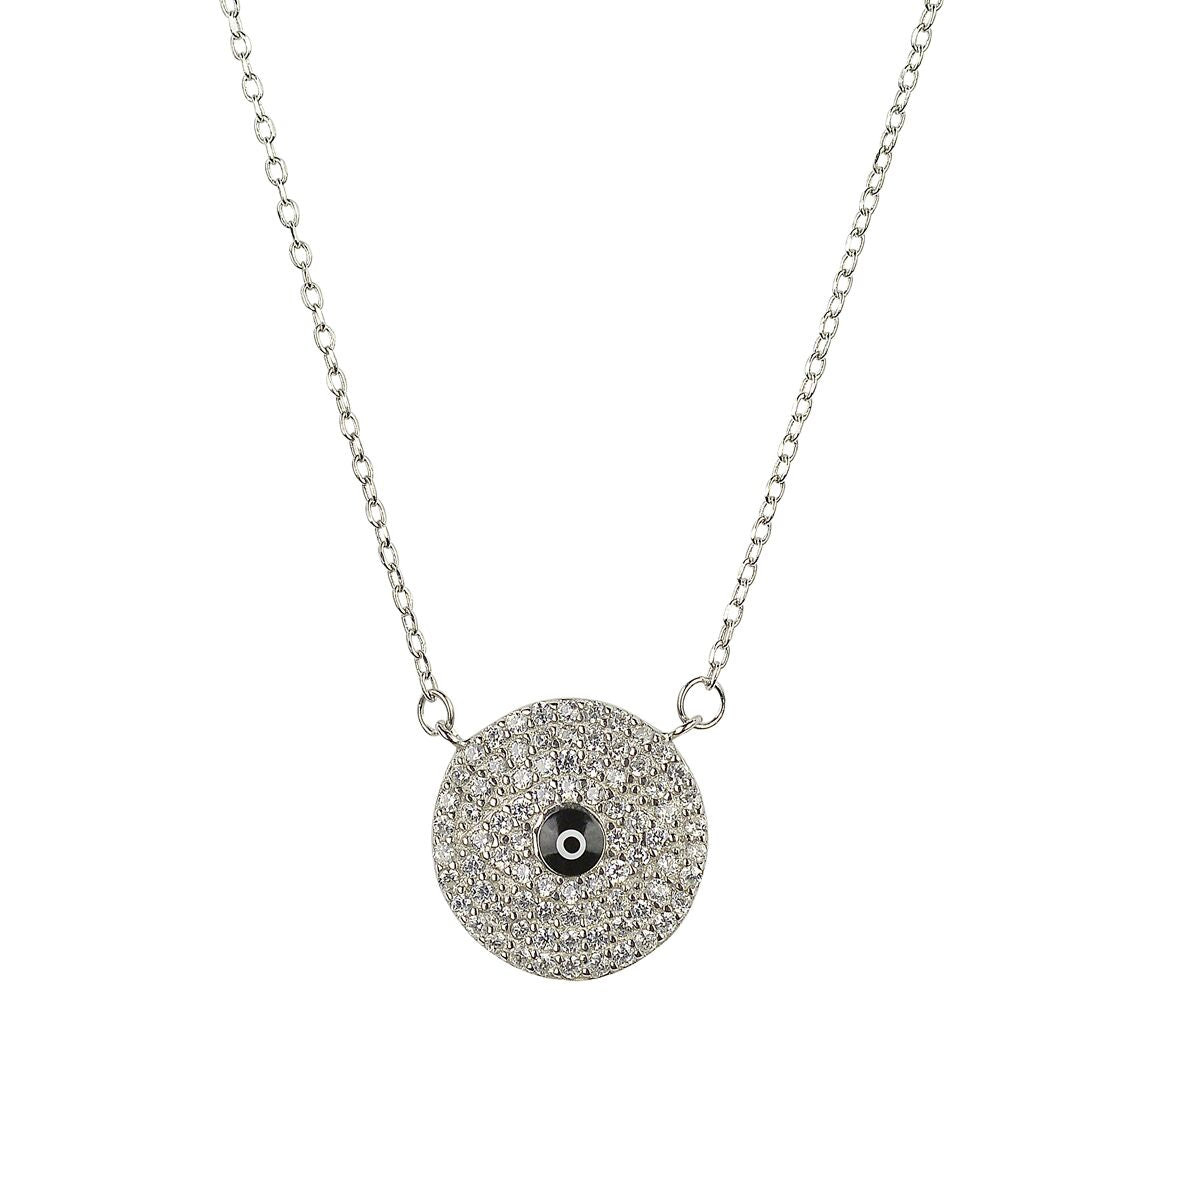 Evil eye necklace surrounded by Swarovski crystals 